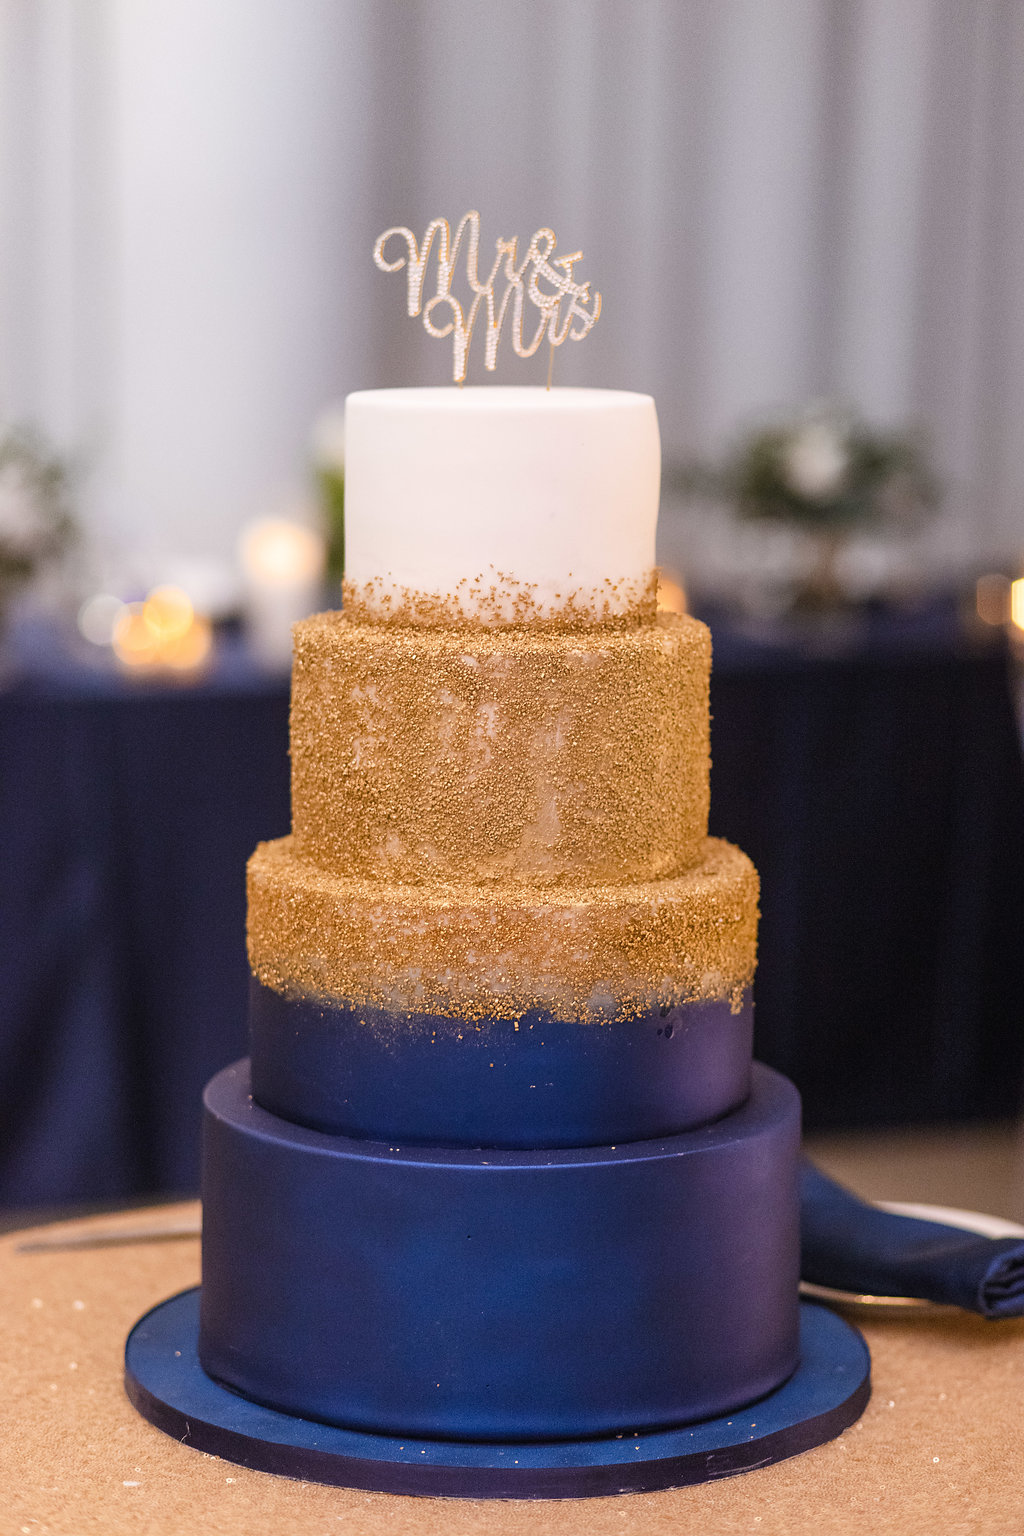 navy and gold wedding cake